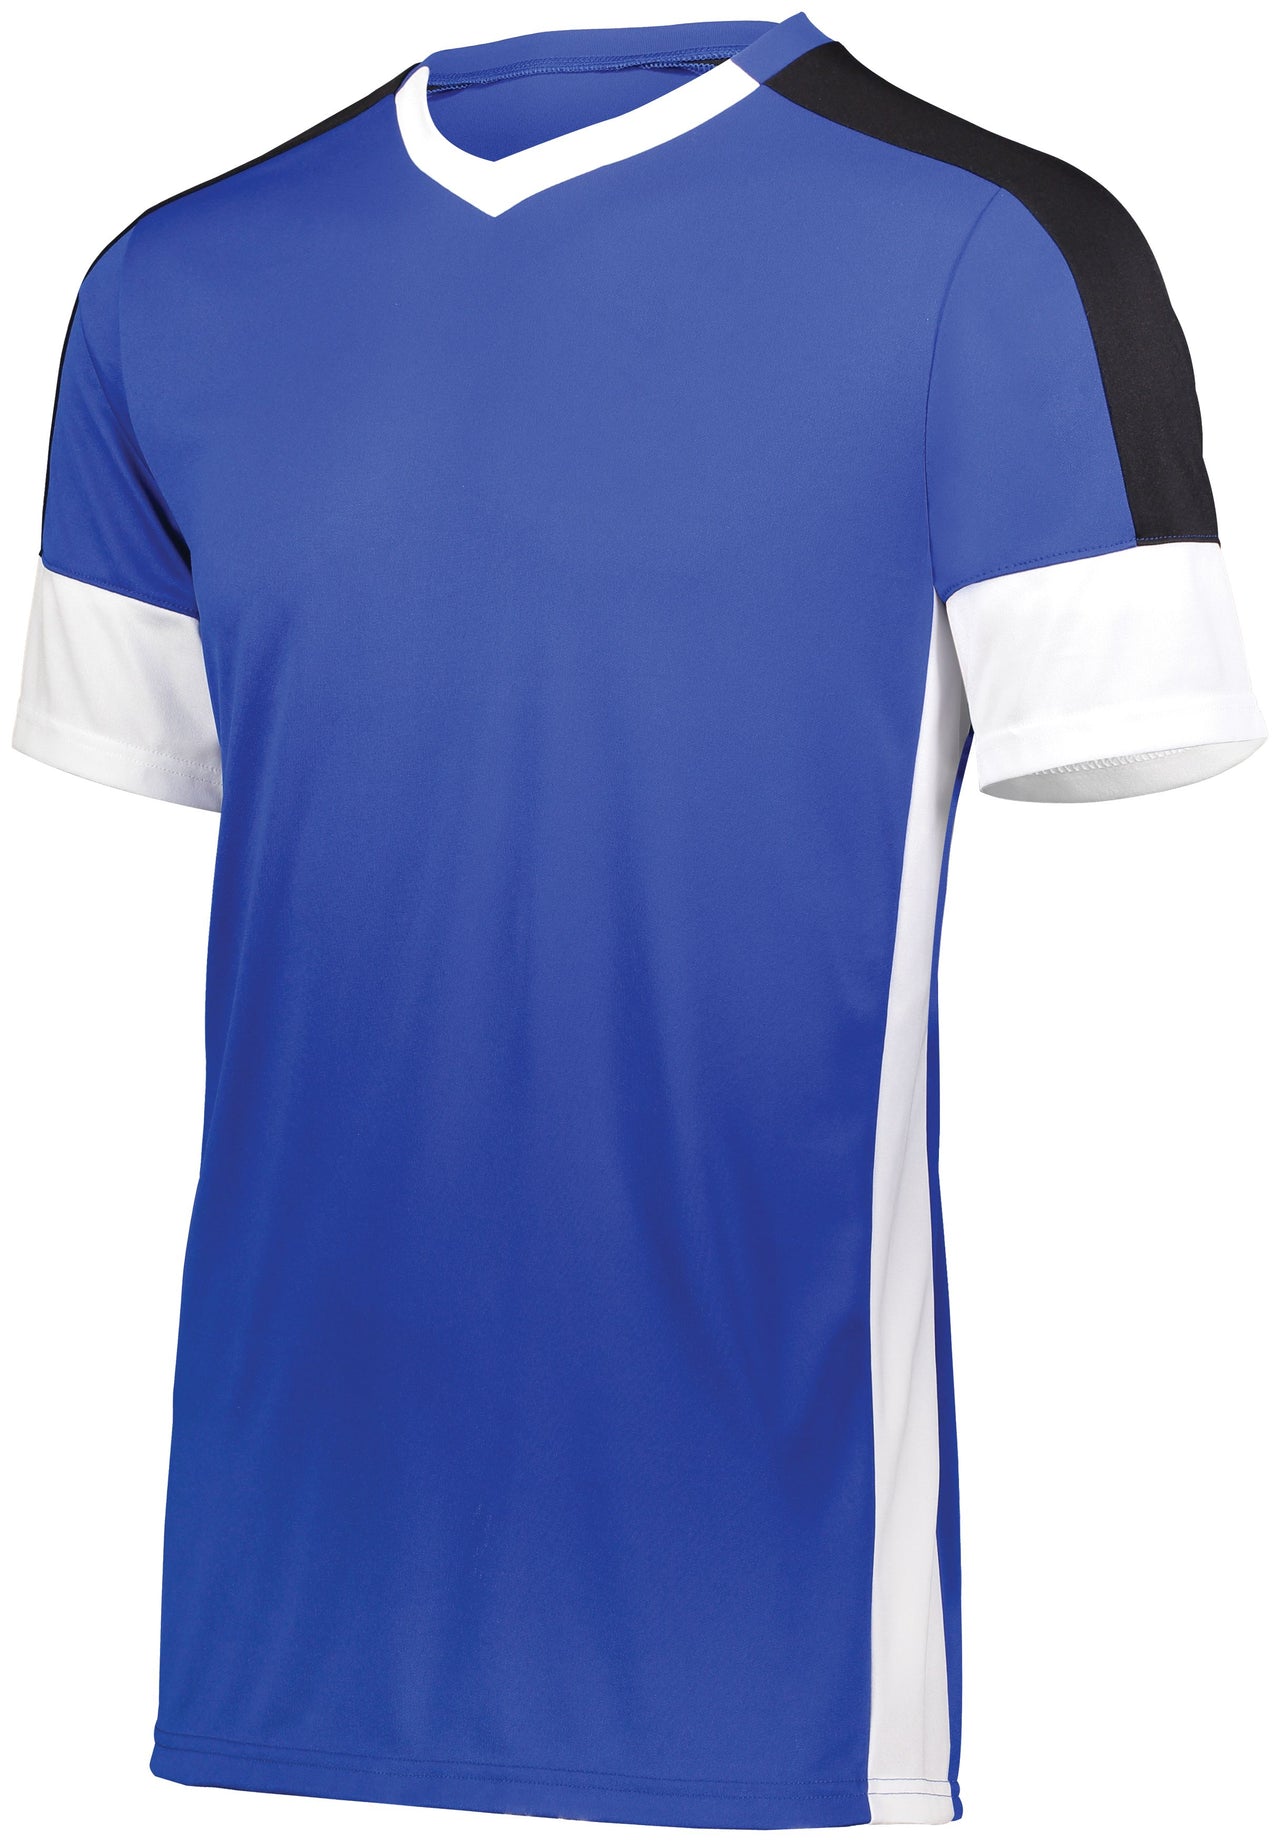 Youth Wembley Soccer Jersey - 322931